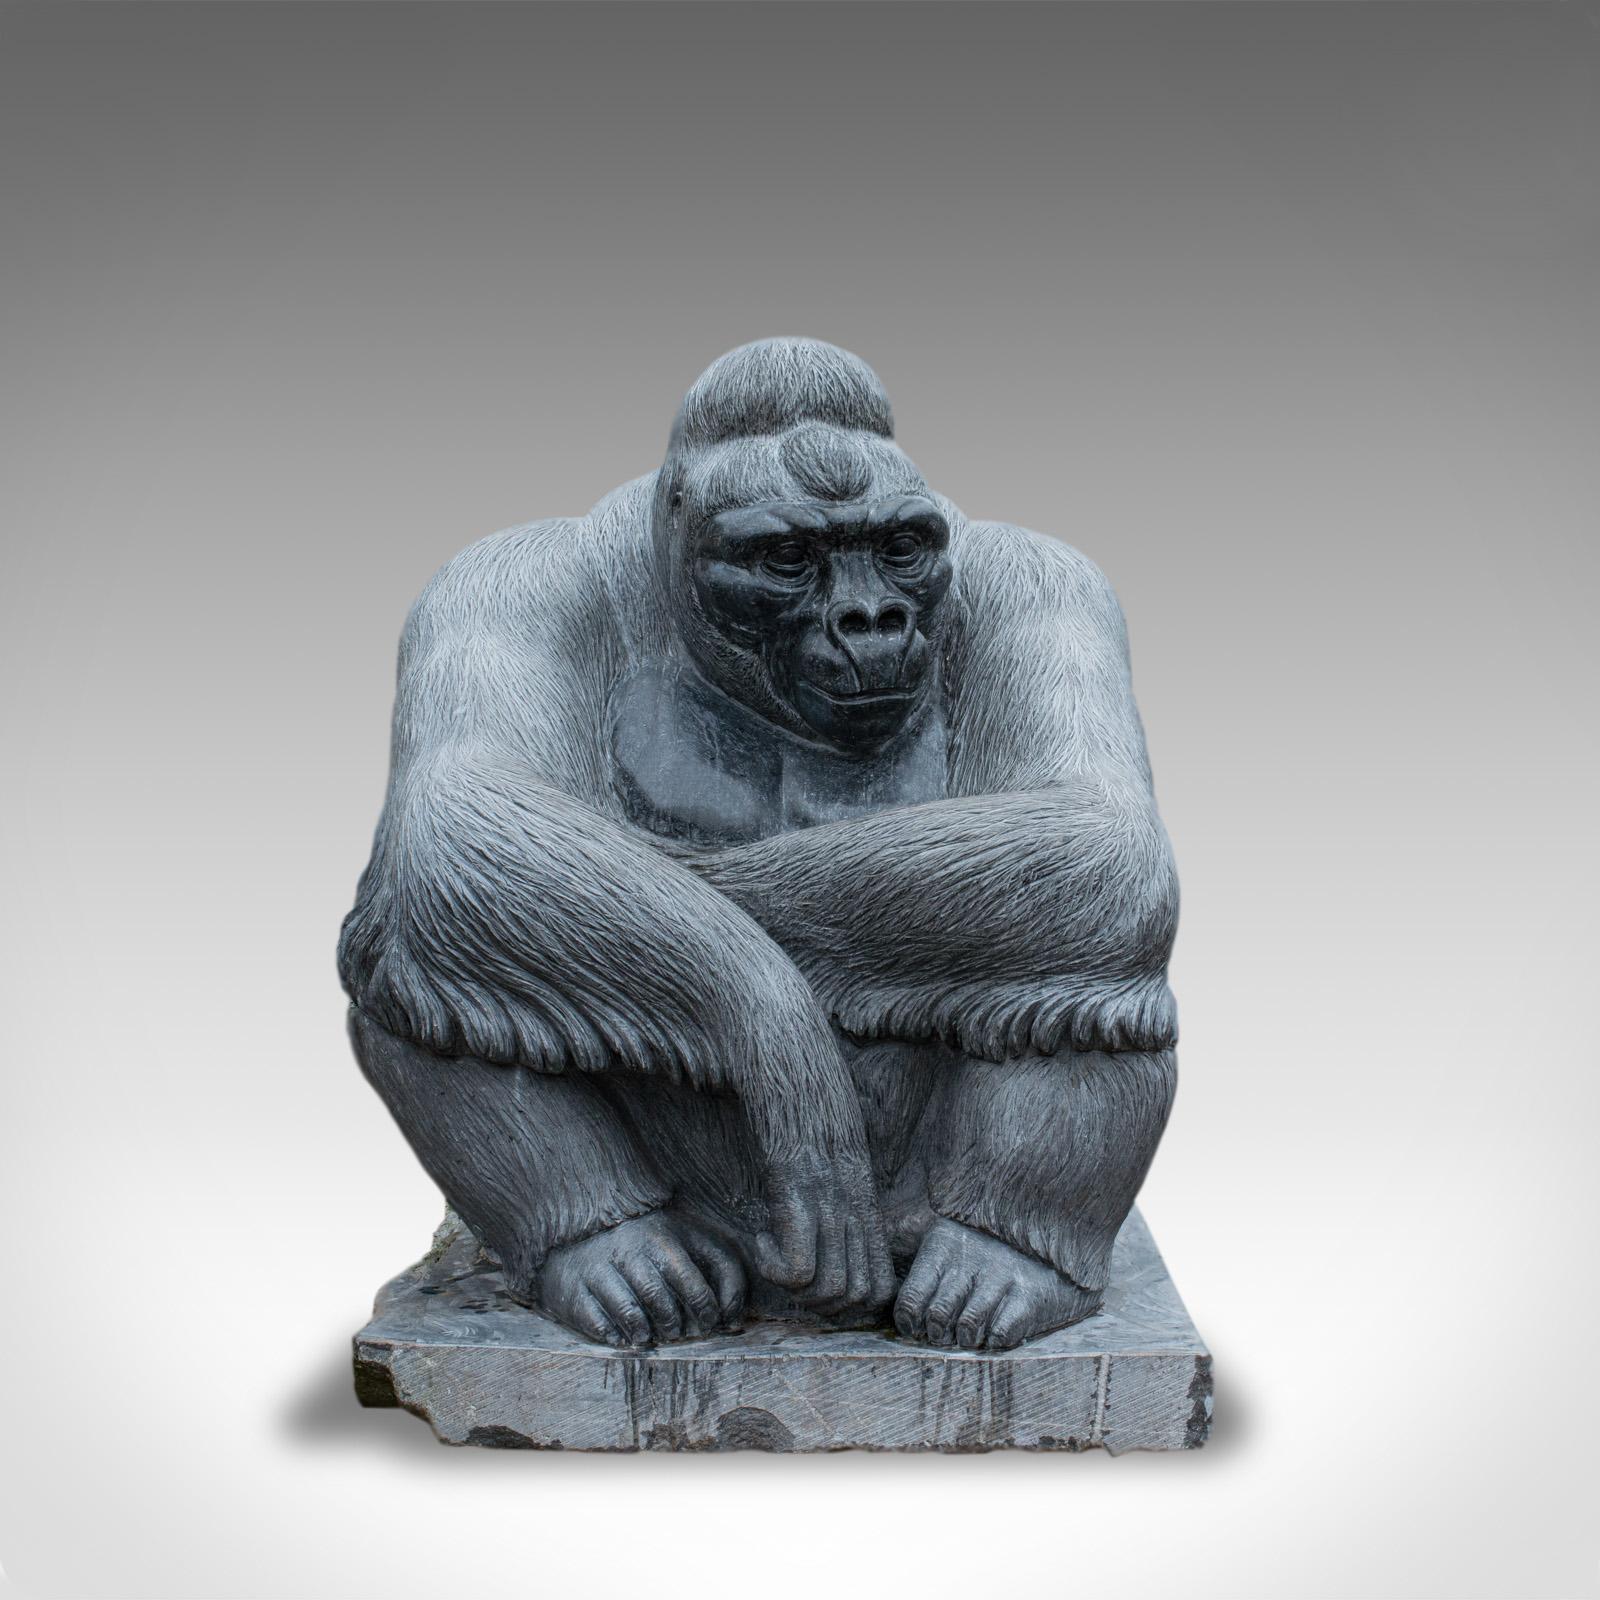 Our stock #18.5982

'Shabani - Gorilla in Thought’ is a monumental sculptural artwork created by the renowned English artist Dominic Hurley.

Hewn from a five tonne solid block of the famous Kilkenny black marble, shipped across St George's